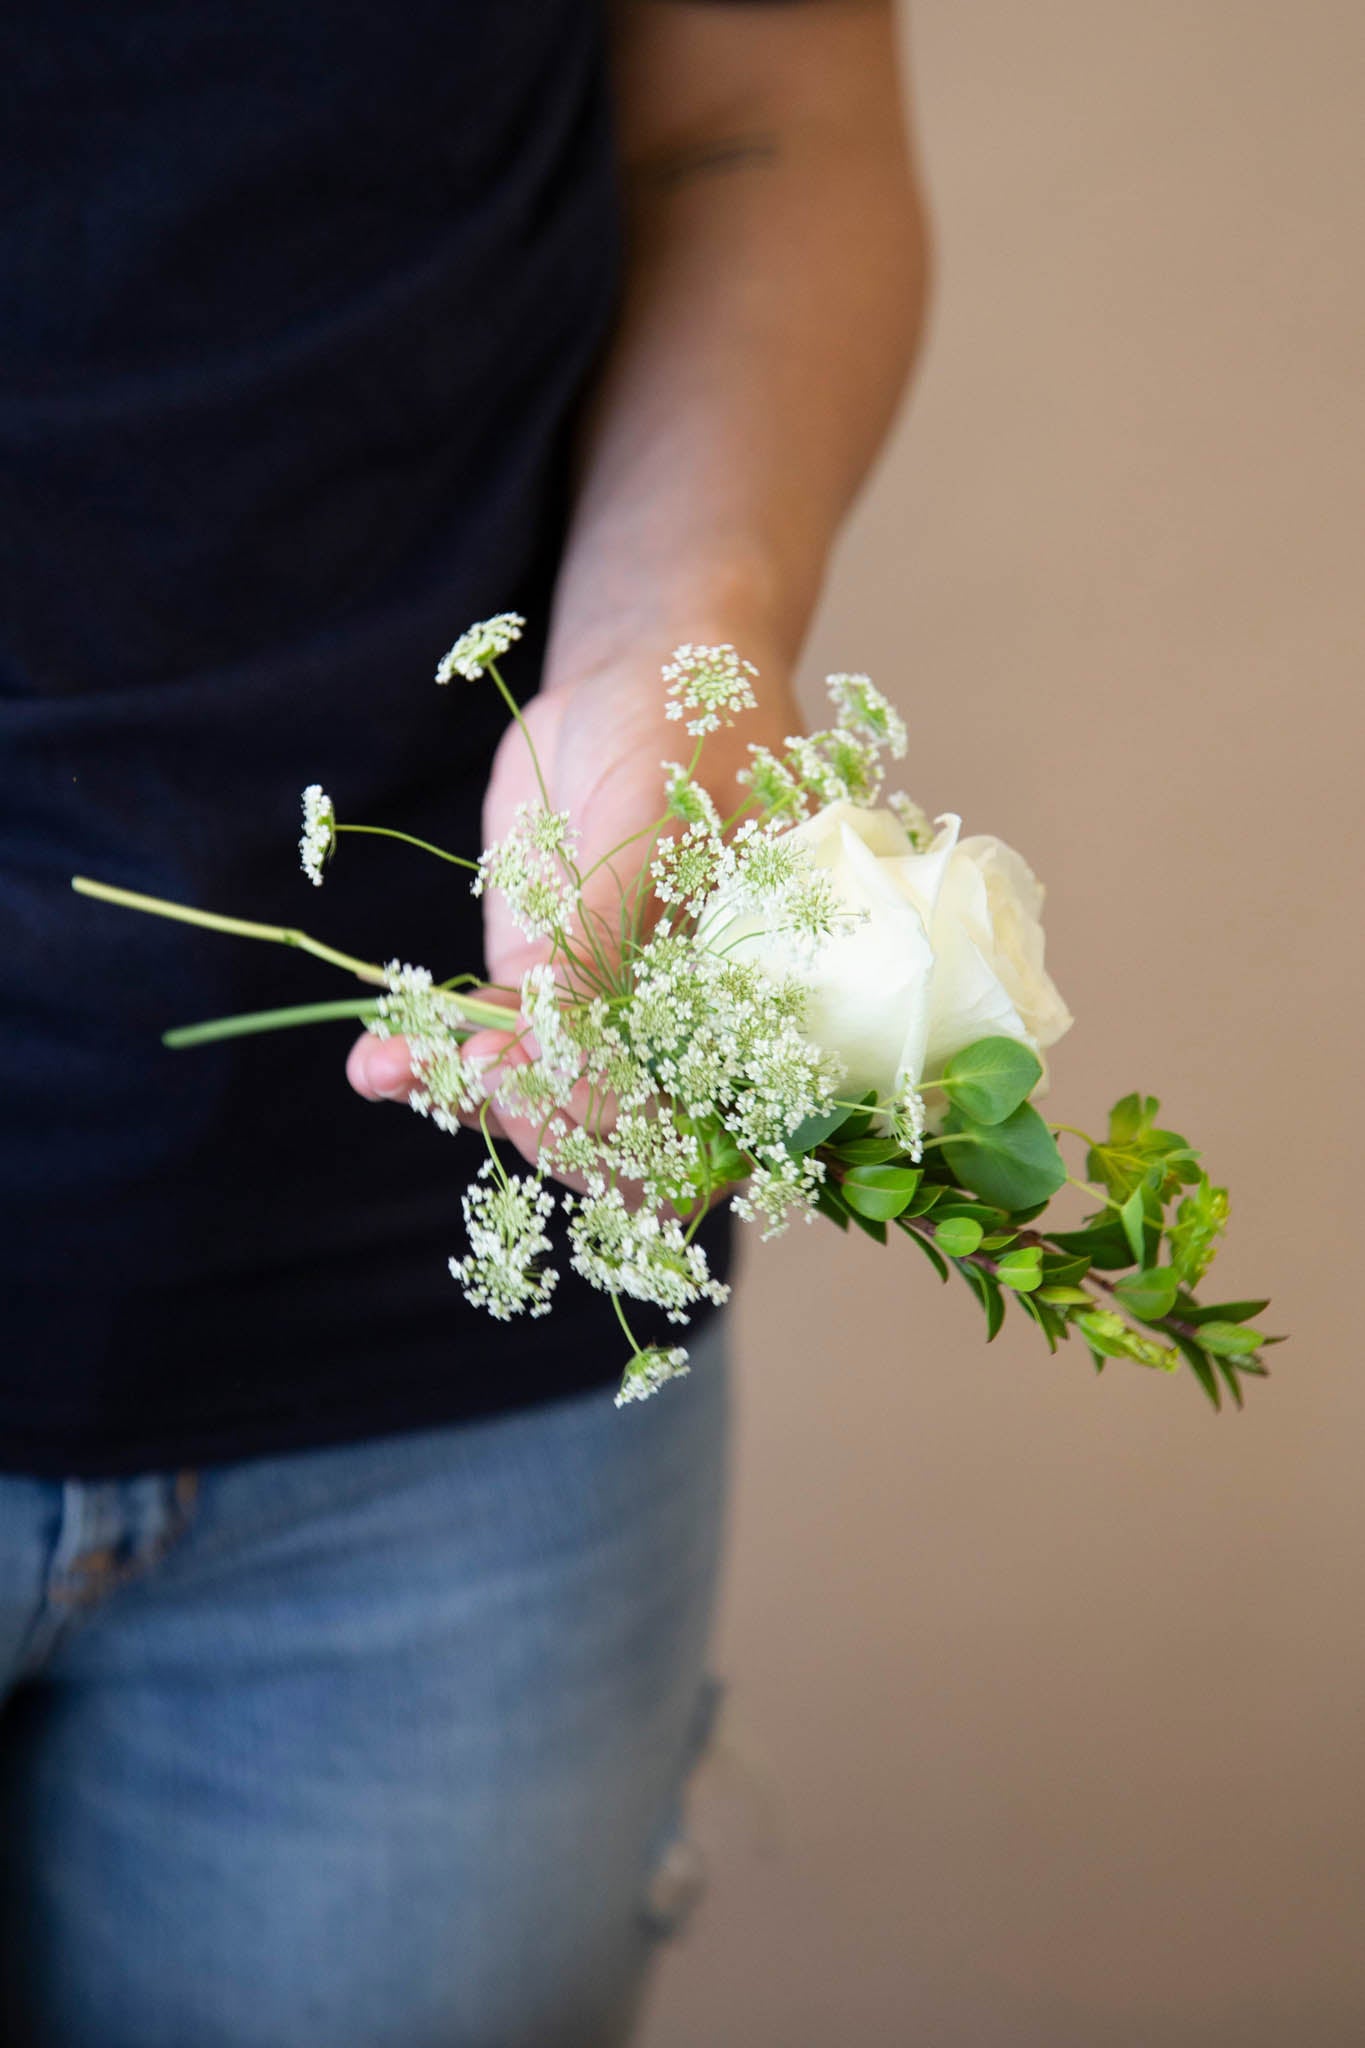 Similarly to designing a boutonniere, add filler flowers to your corsage for dimension